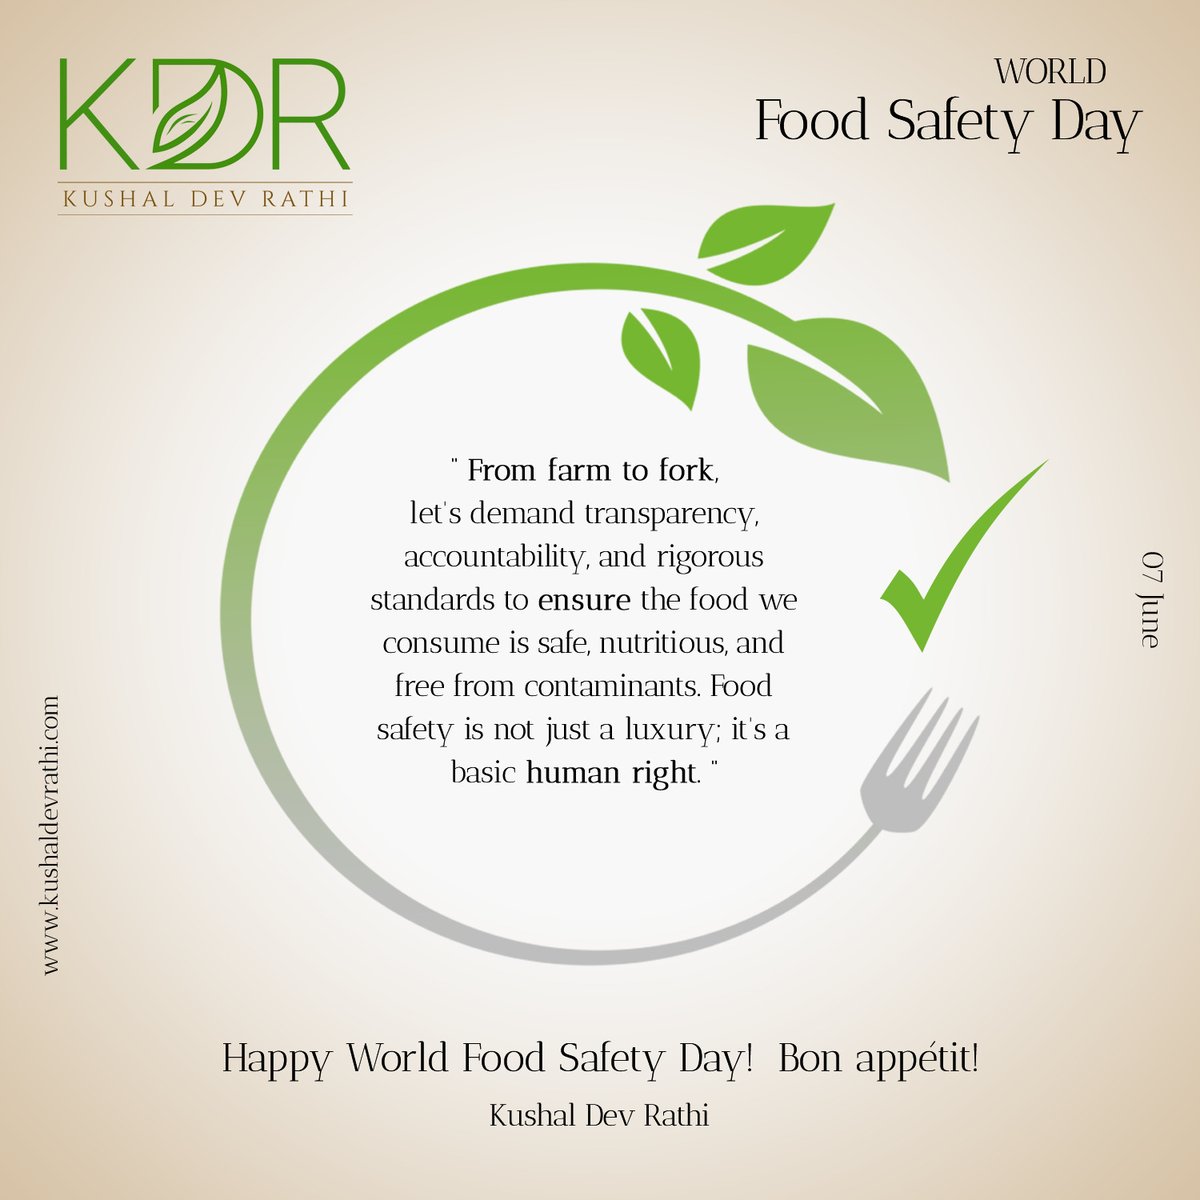 #jeevankaearth
From farm to fork, let's demand transparency, accountability, and rigorous standards to ensure the food we consume is safe, nutritious, and free from contaminants. 
Happy World Food Safety Day!  Bon appétit! 
#WorldFoodSafetyDay #FoodSafetyMatters #SafeFoodForAll